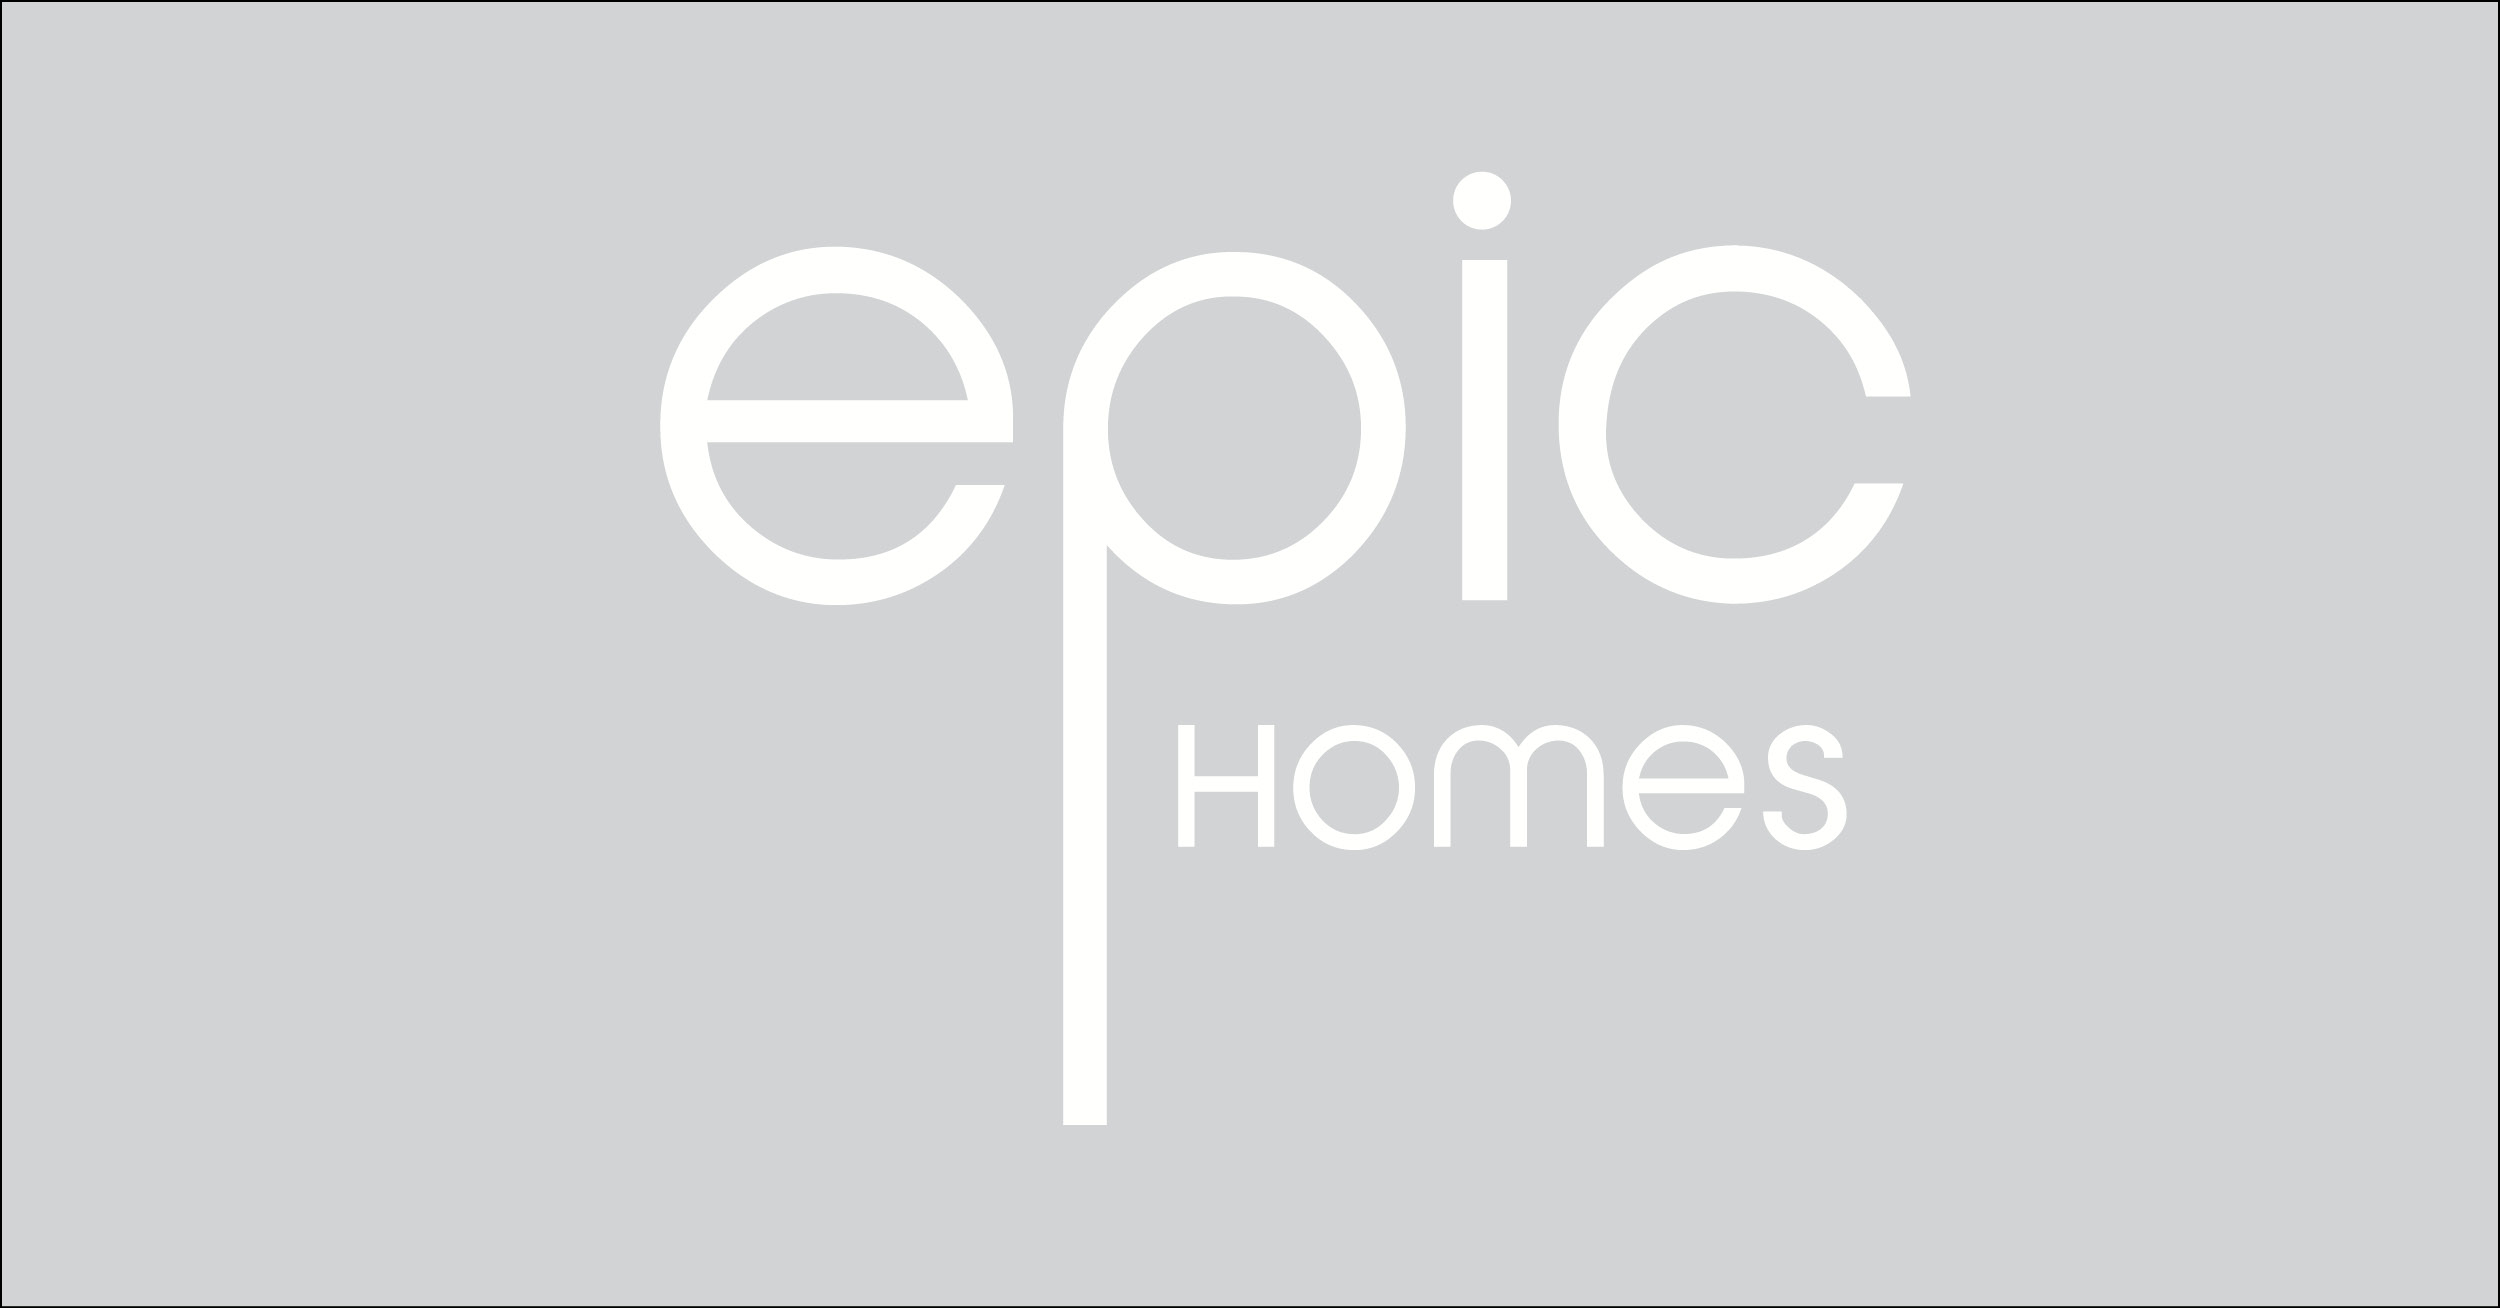 Find new construction or search for new homes and communities by Epic Homes, now the New Home Company in Colorado